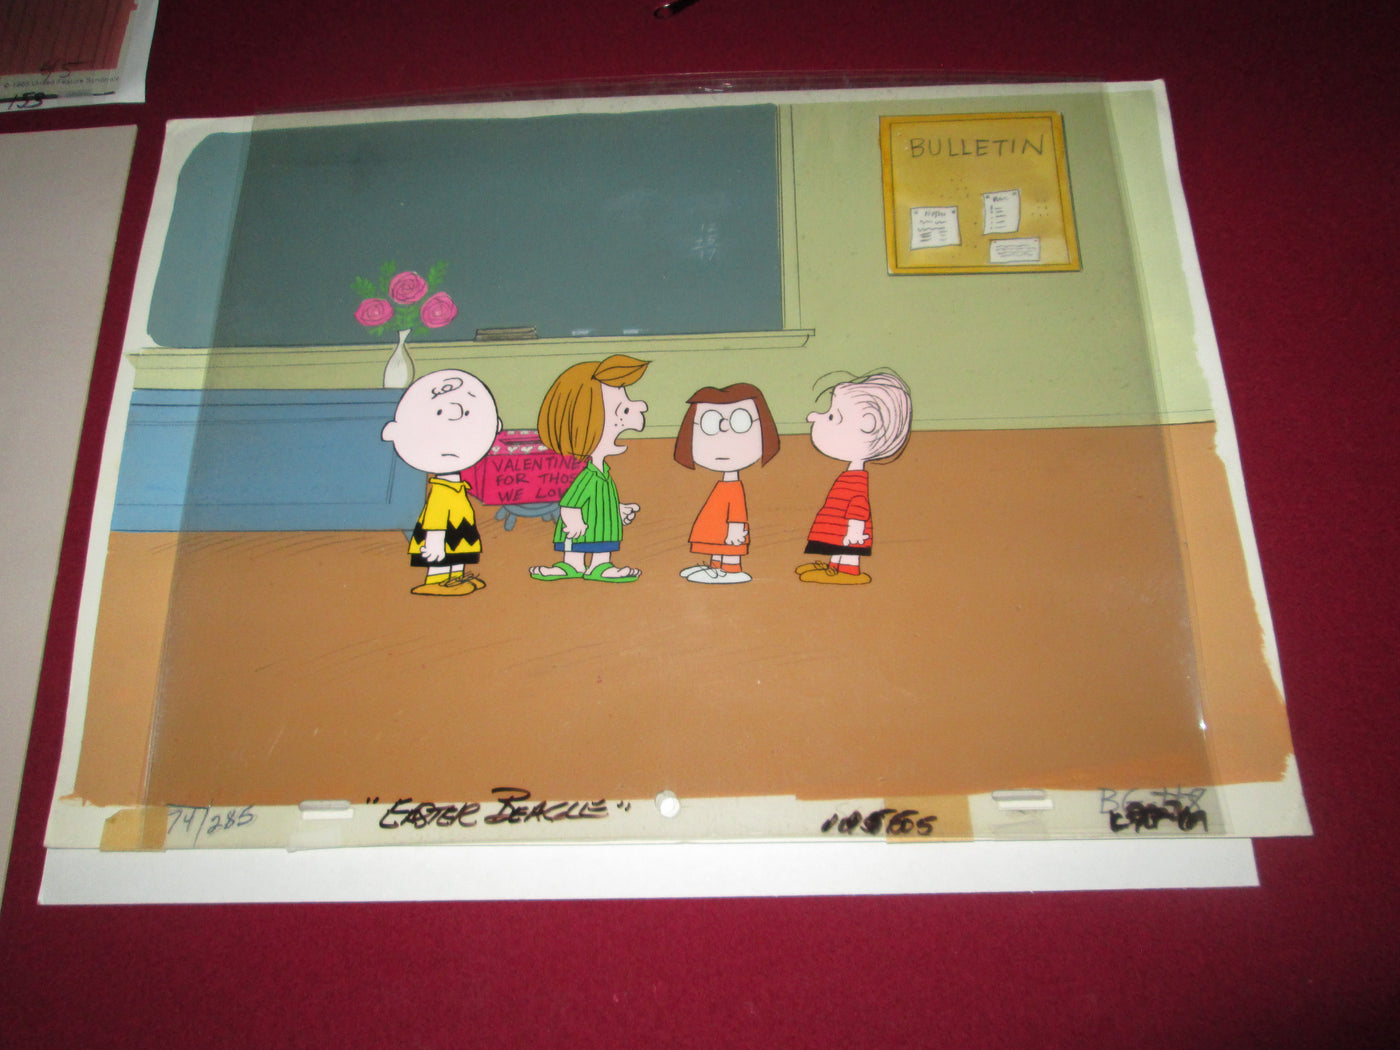 Original Peanuts Production Cel on Production Background featuring Charlie Brown, Peppermint Patty, Marcie, and Linus